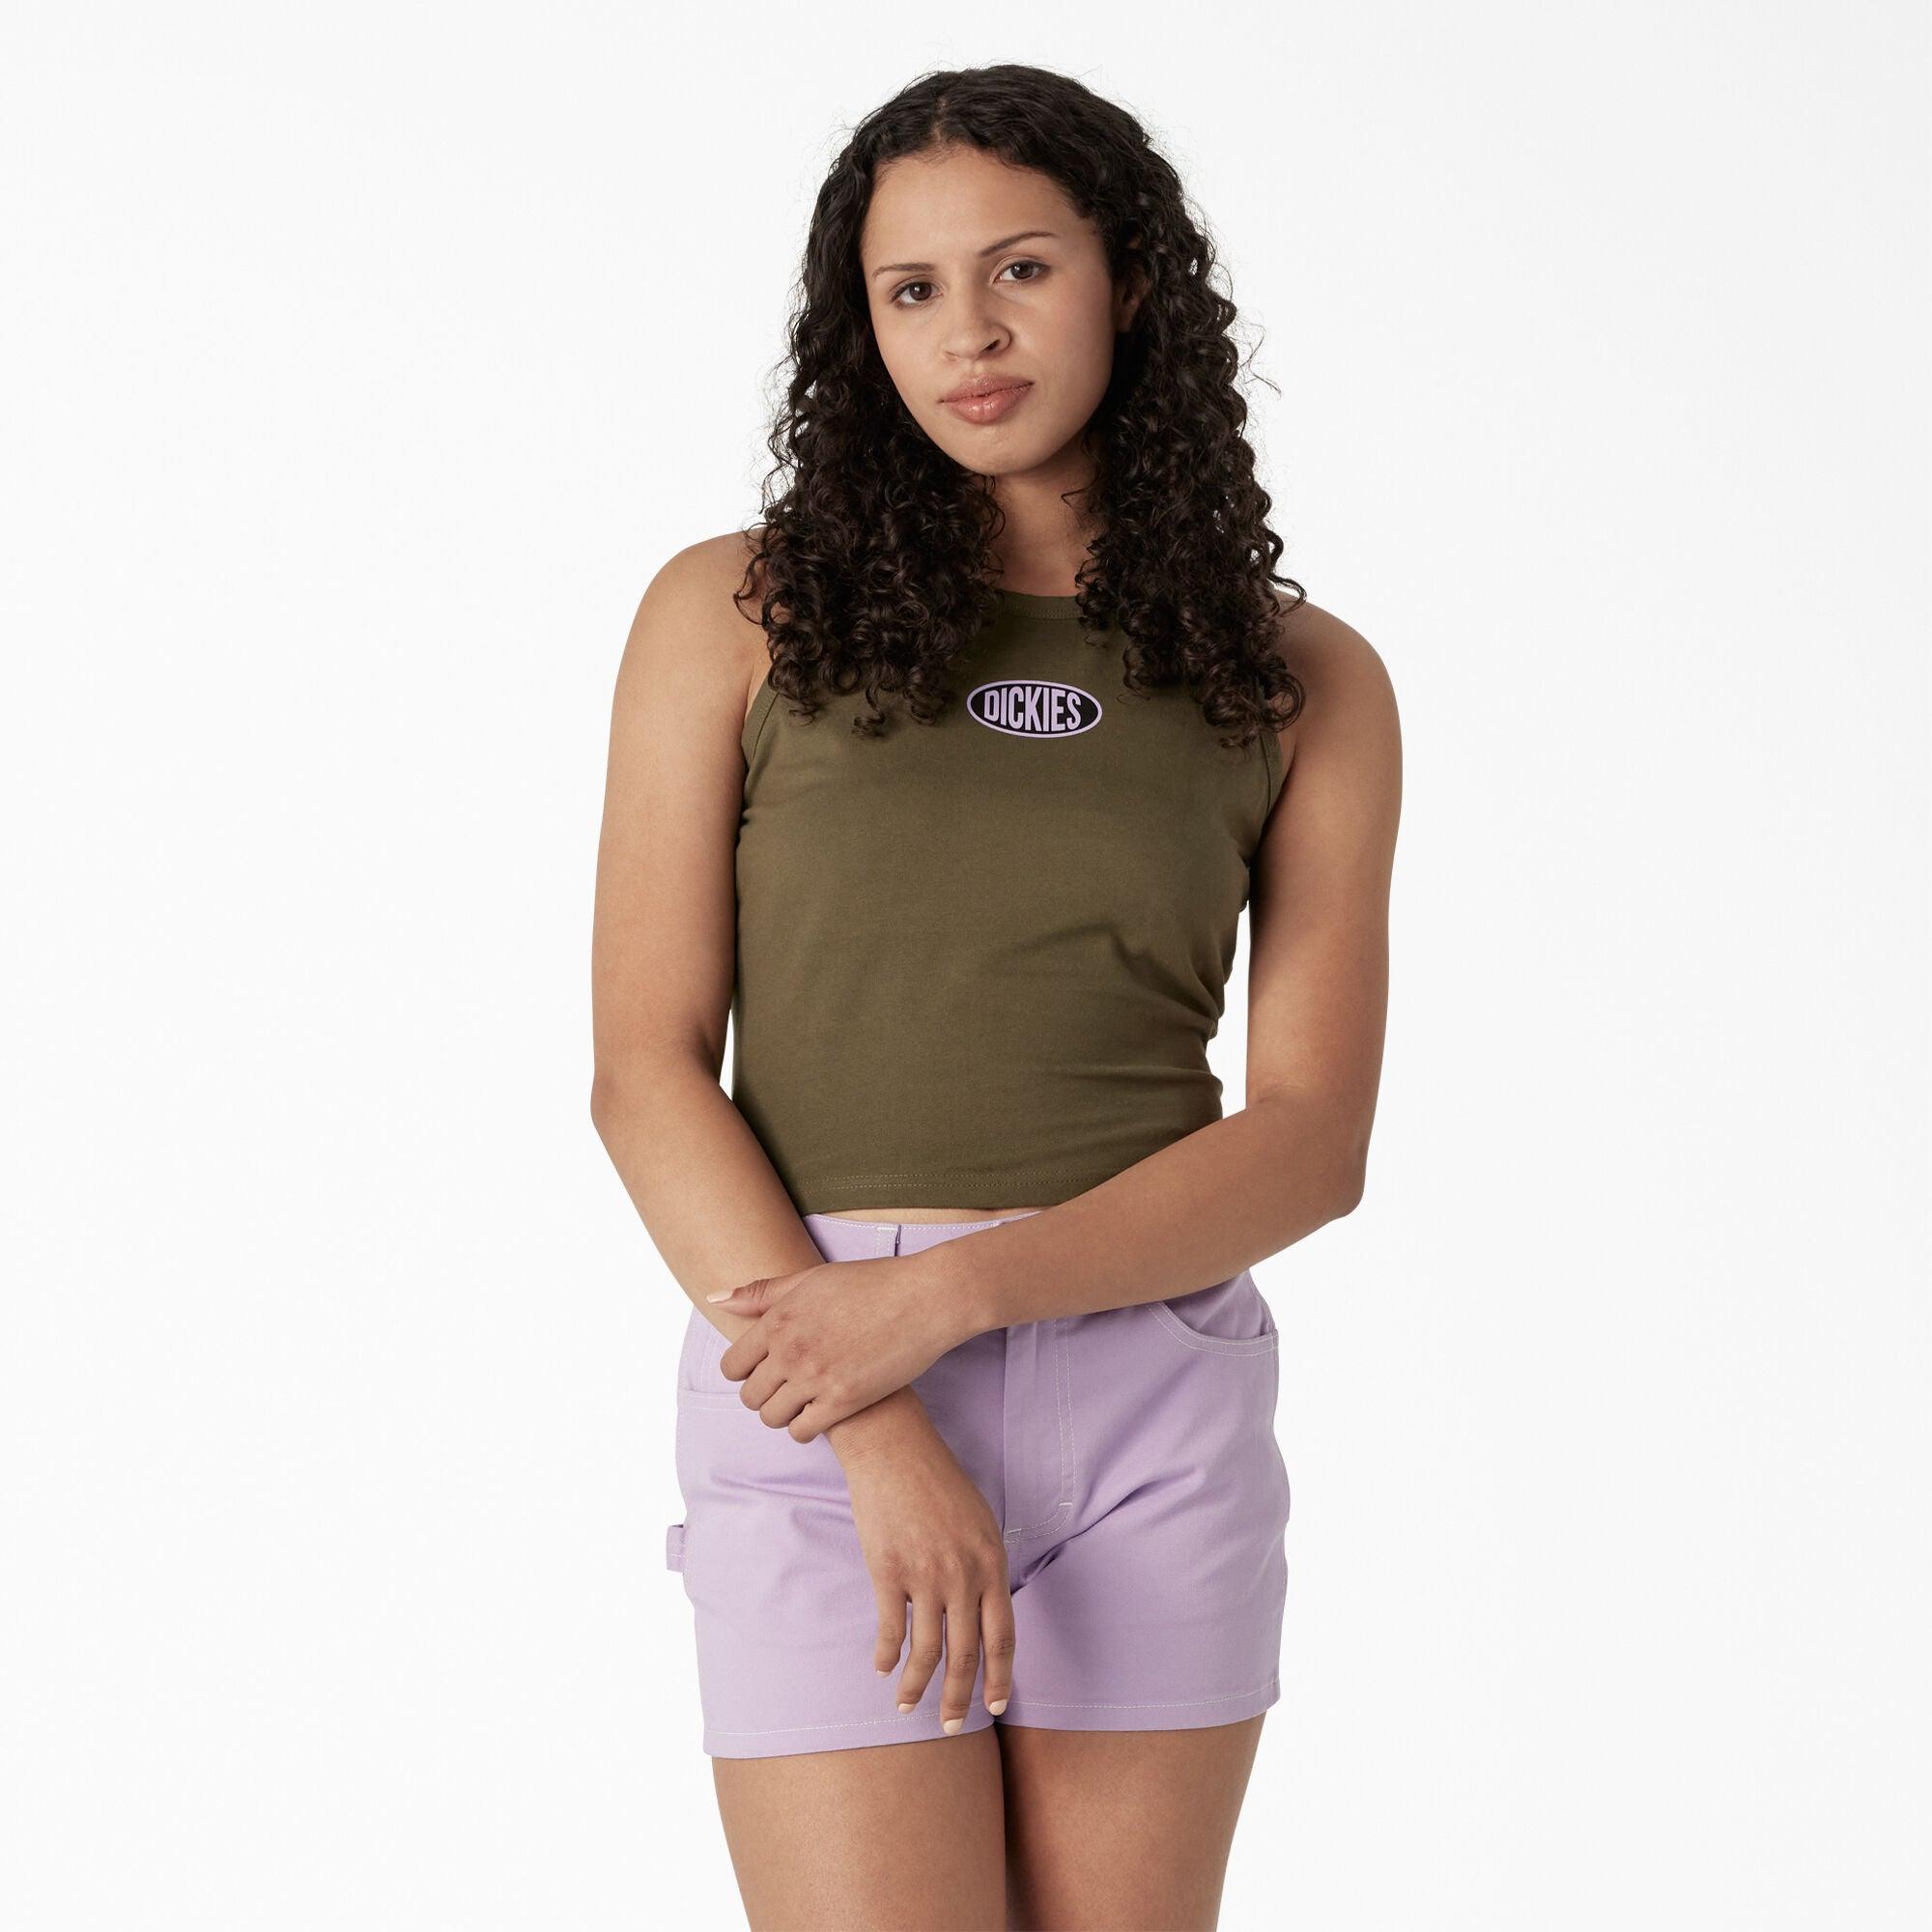 Women's Racerback Cropped Tank Top, Green - Purpose-Built / Home of the Trades